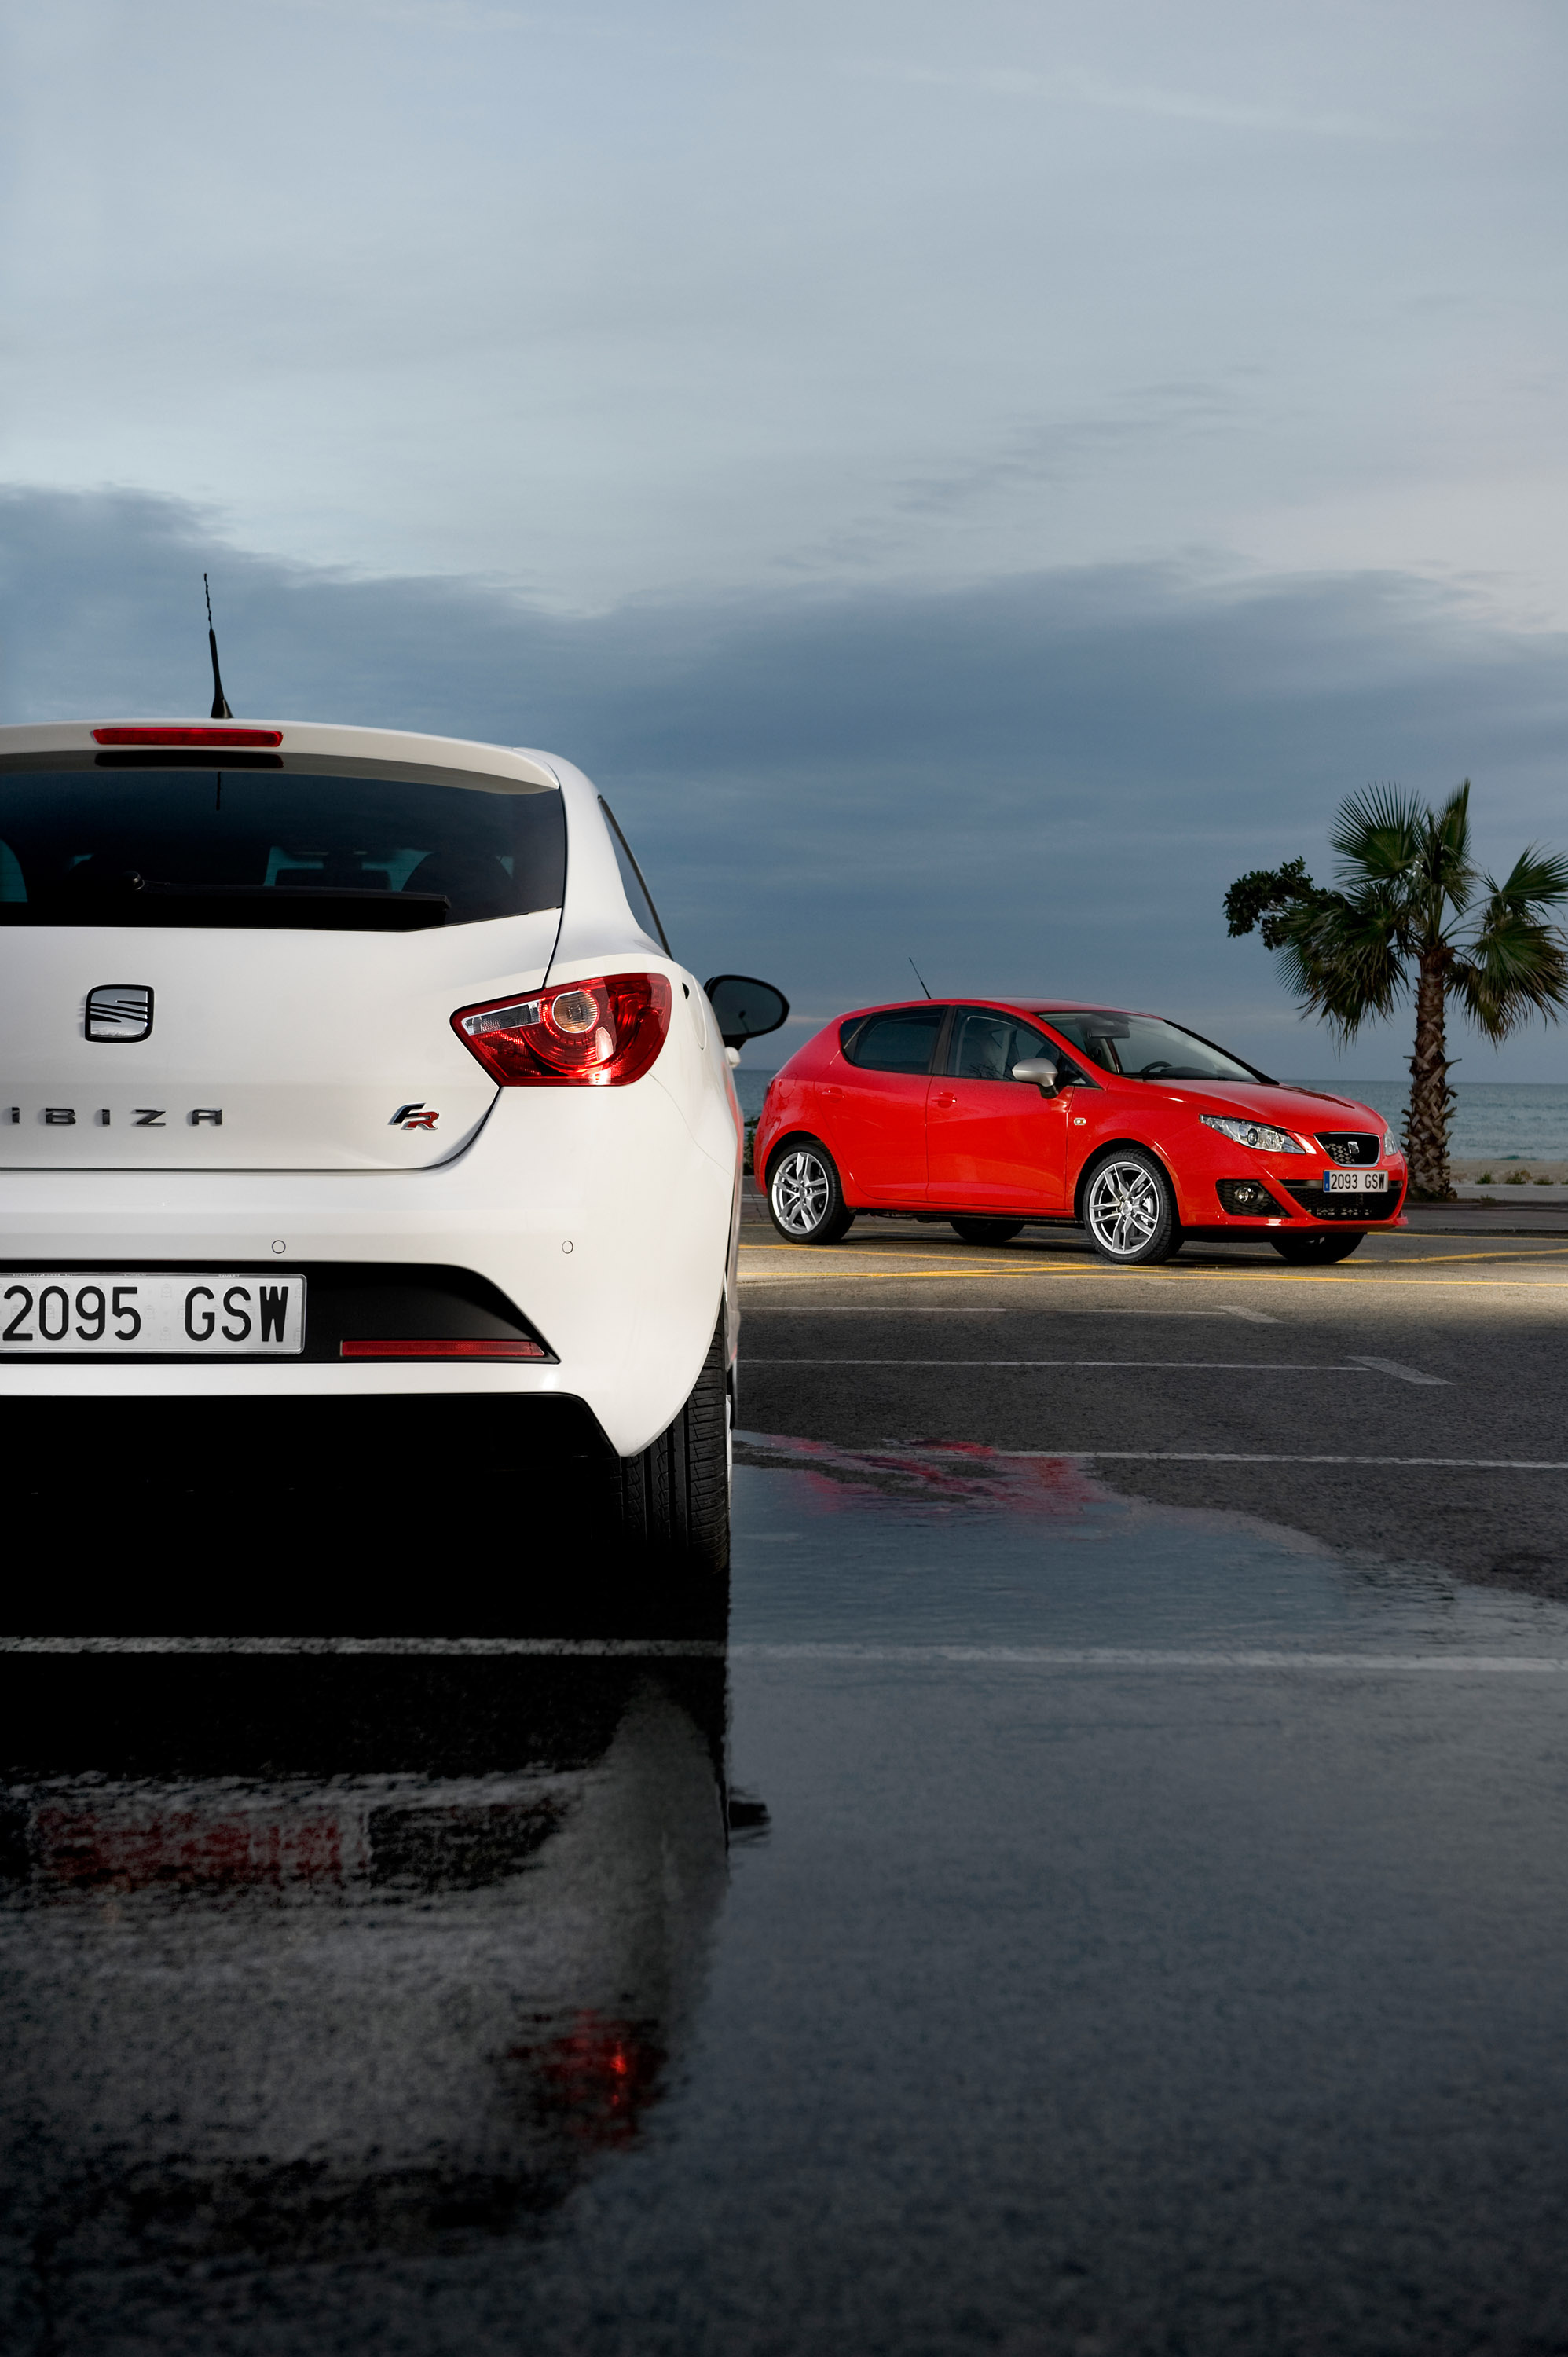 Seat Ibiza FR, Powerful diesel engine, HD picture of seat Ibiza, Model 2010, 2000x3000 HD Phone